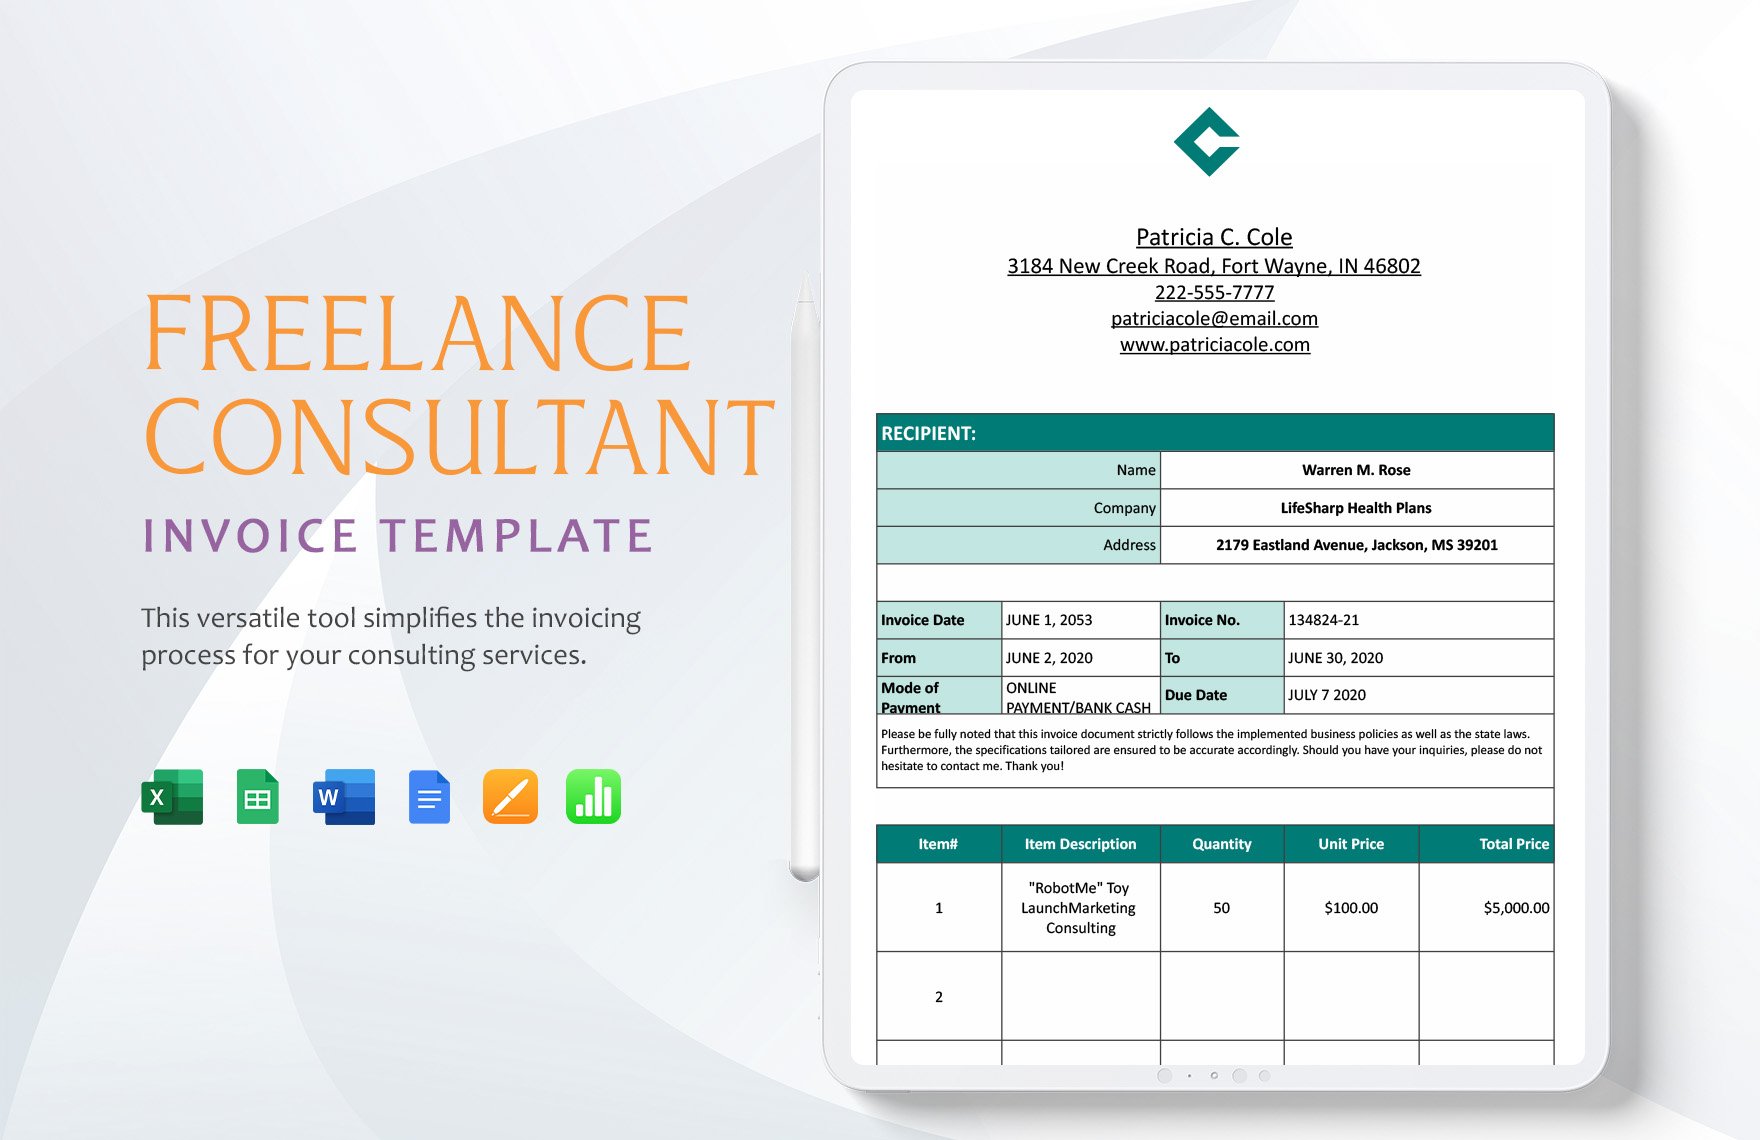 Freelance Consultant Invoice Template in Word, Google Docs, Excel, Google Sheets, Apple Pages, Apple Numbers